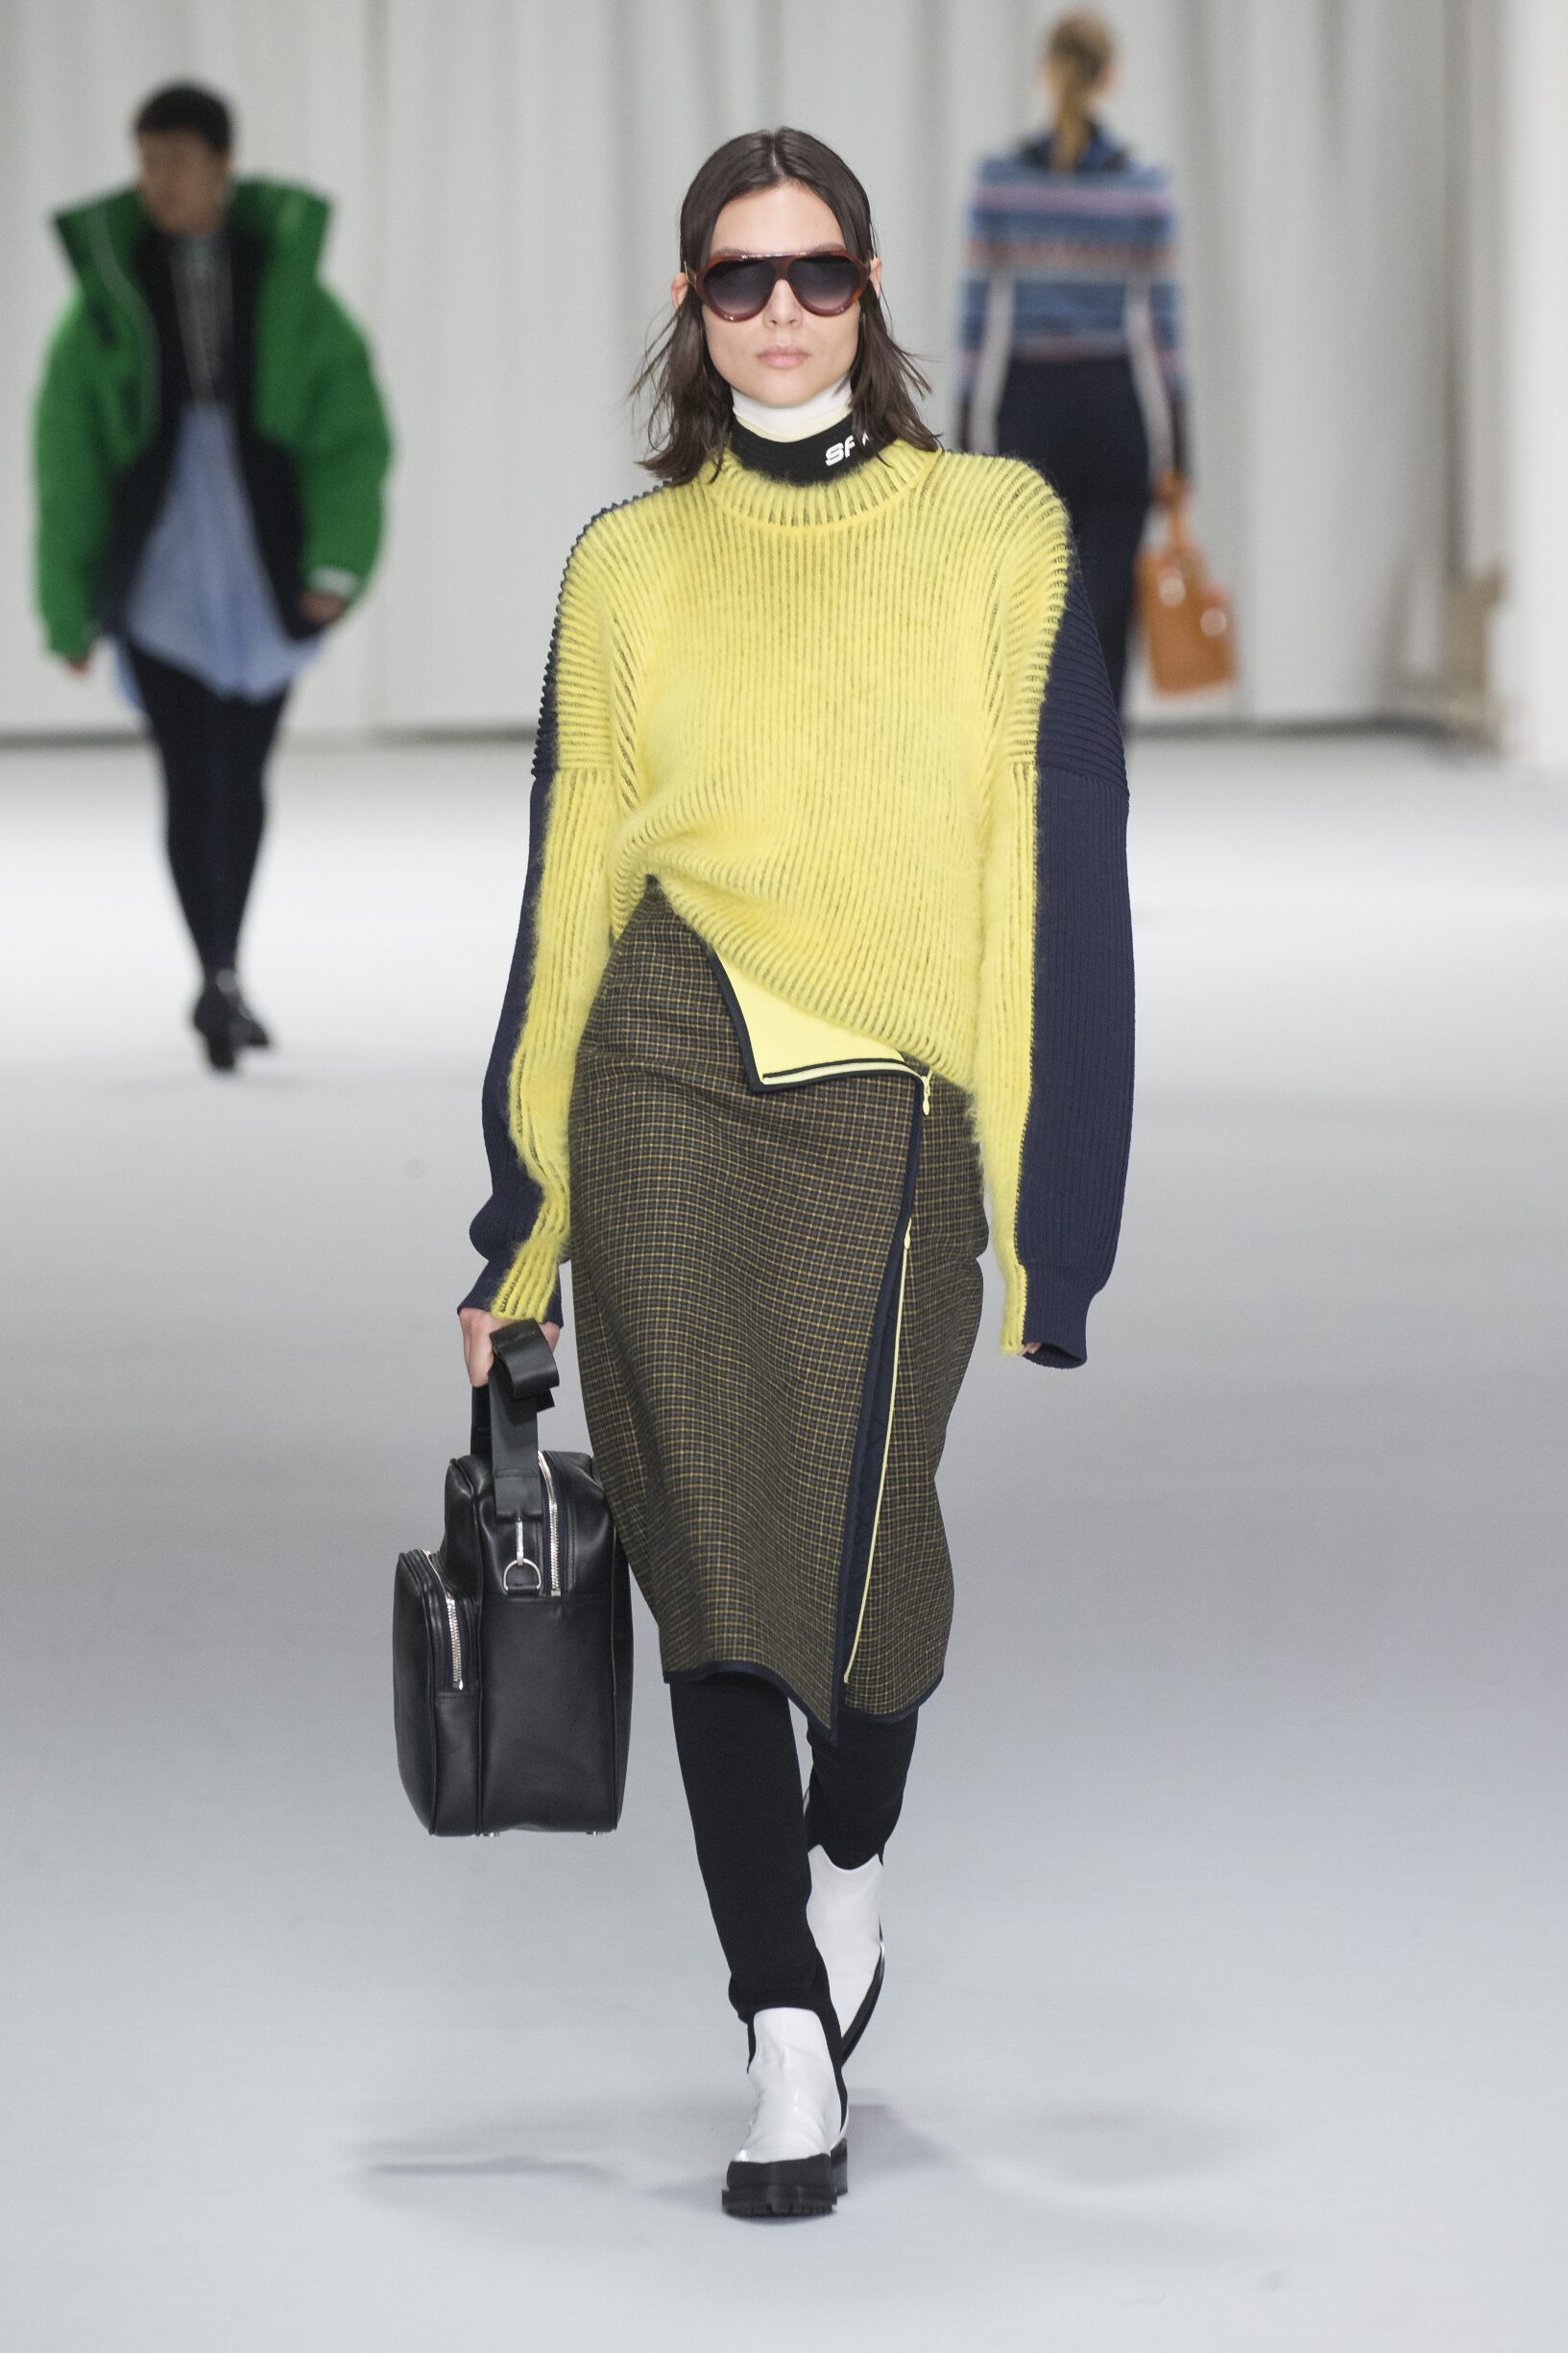 SPORTMAX FALL WINTER 2018 WOMEN'S COLLECTION | The Skinny Beep